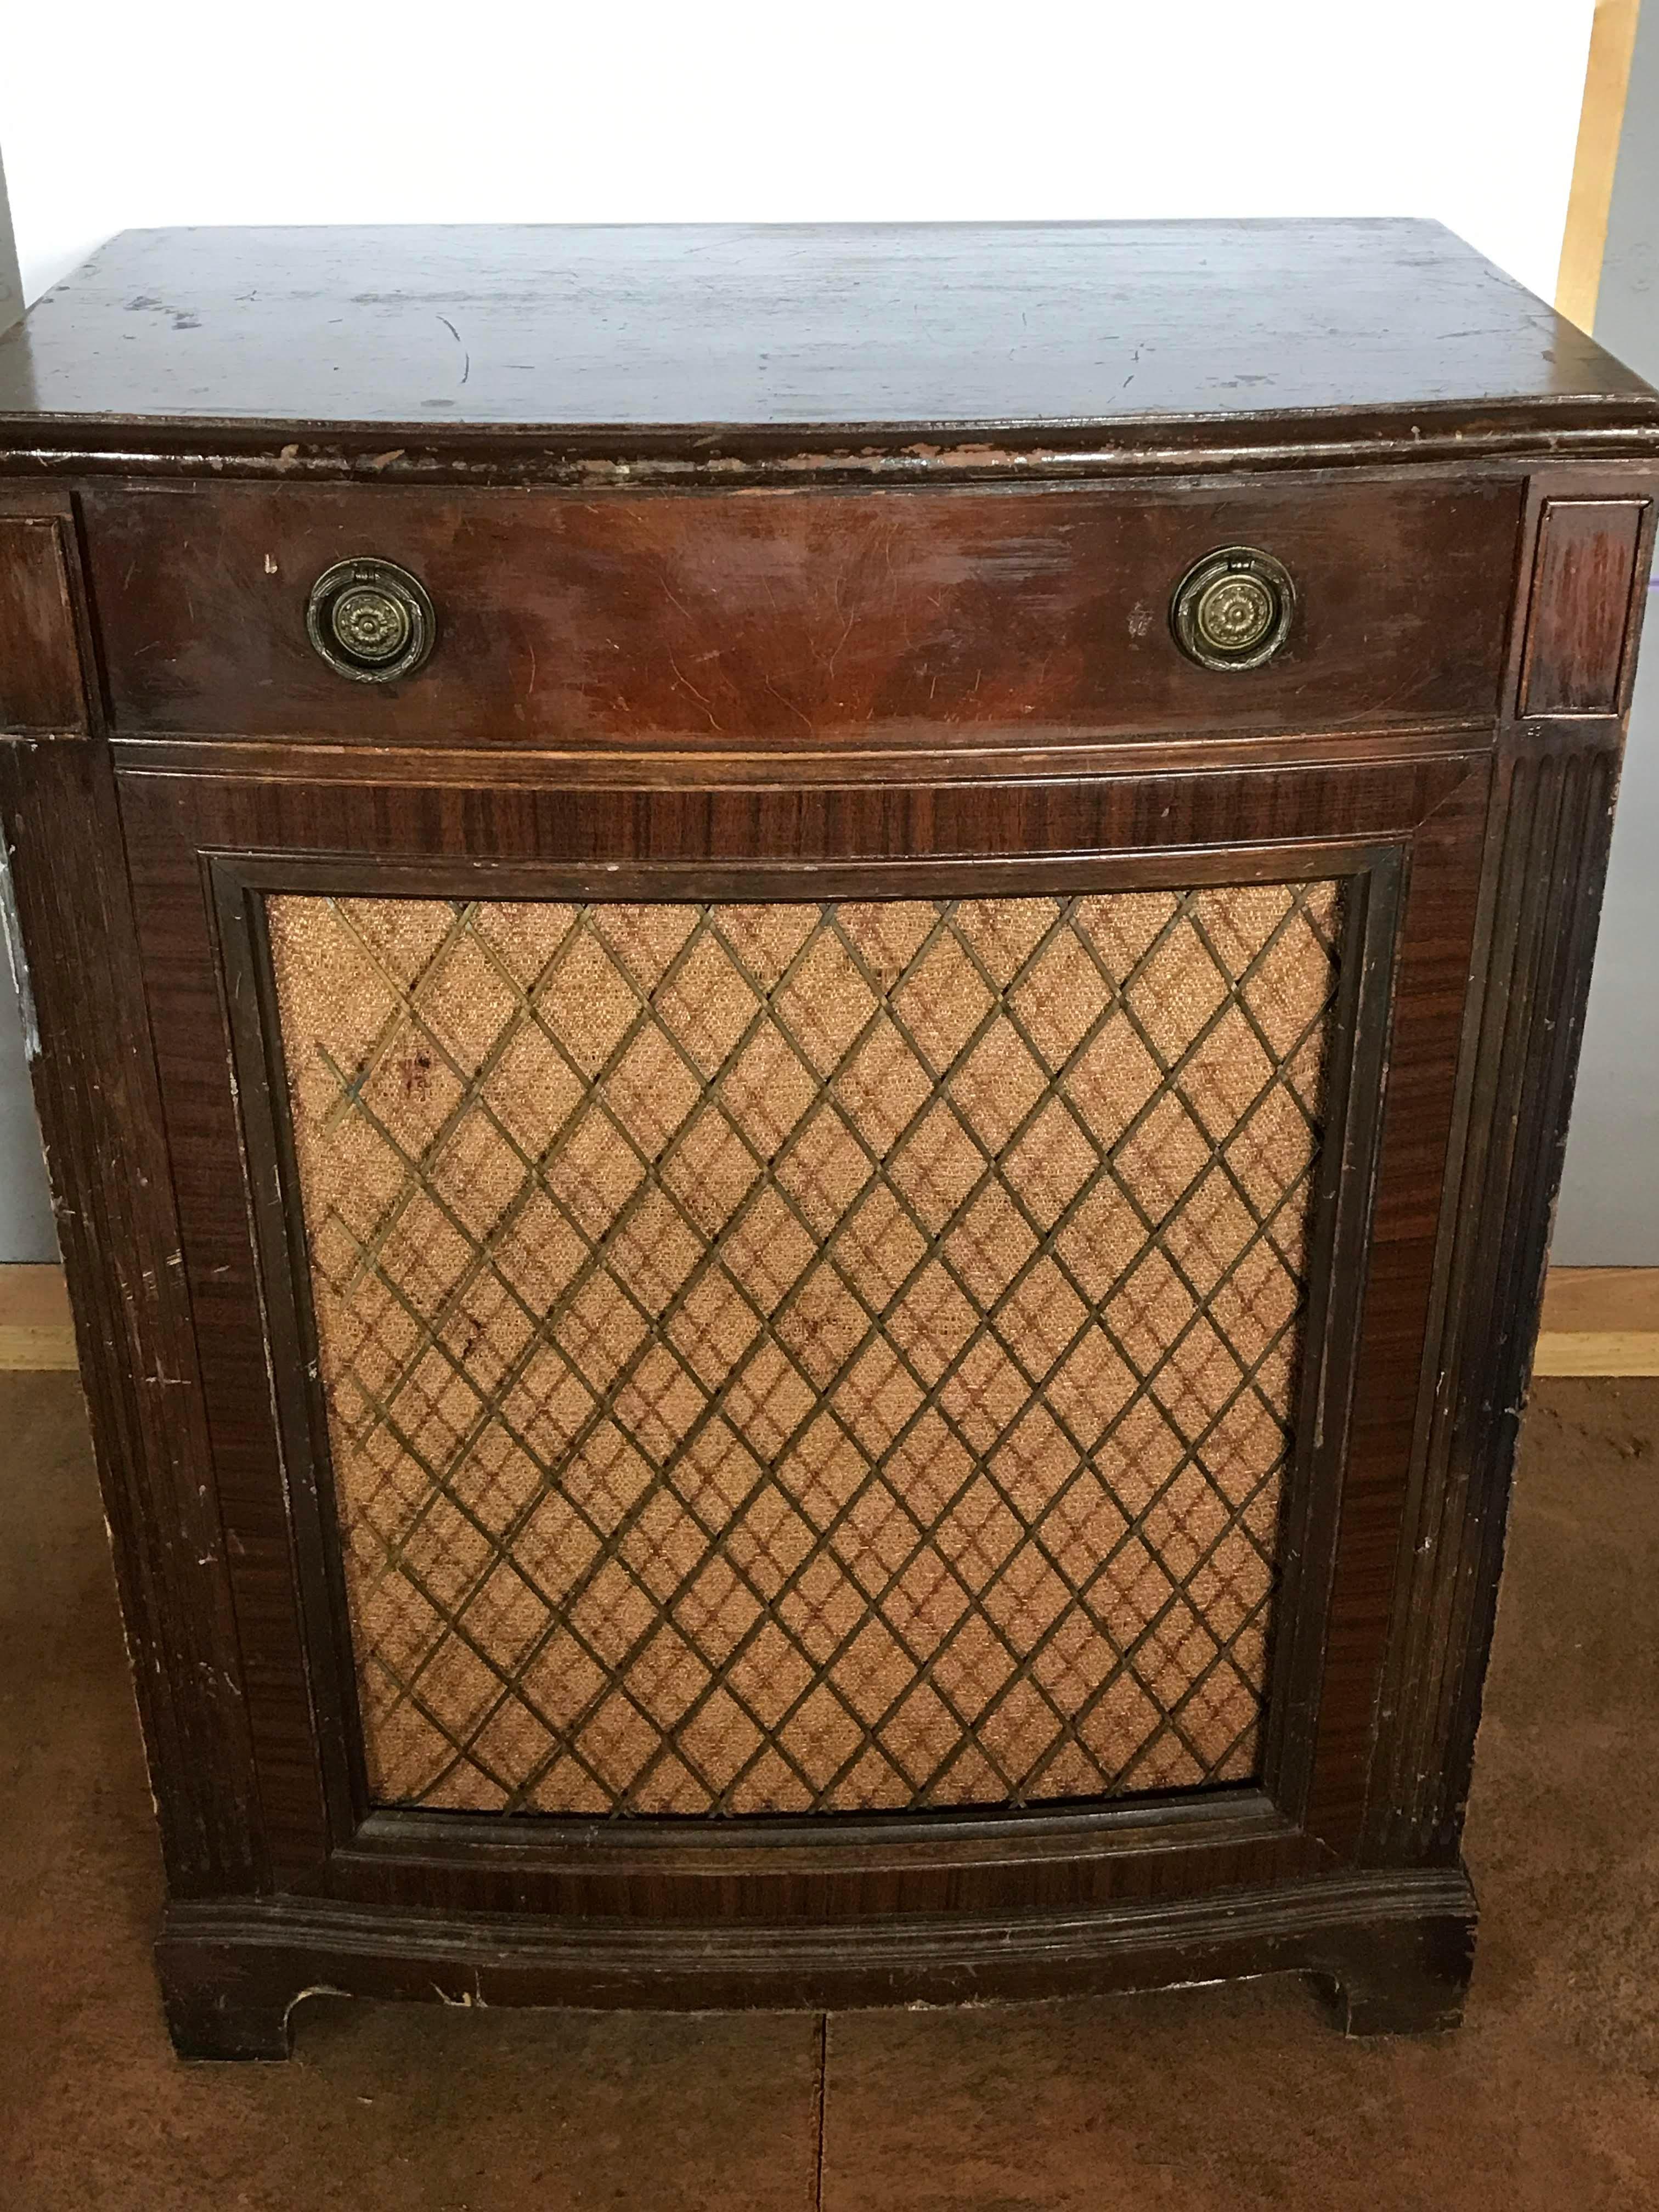 Vintage Wooden Stereo Cabinet - Empty